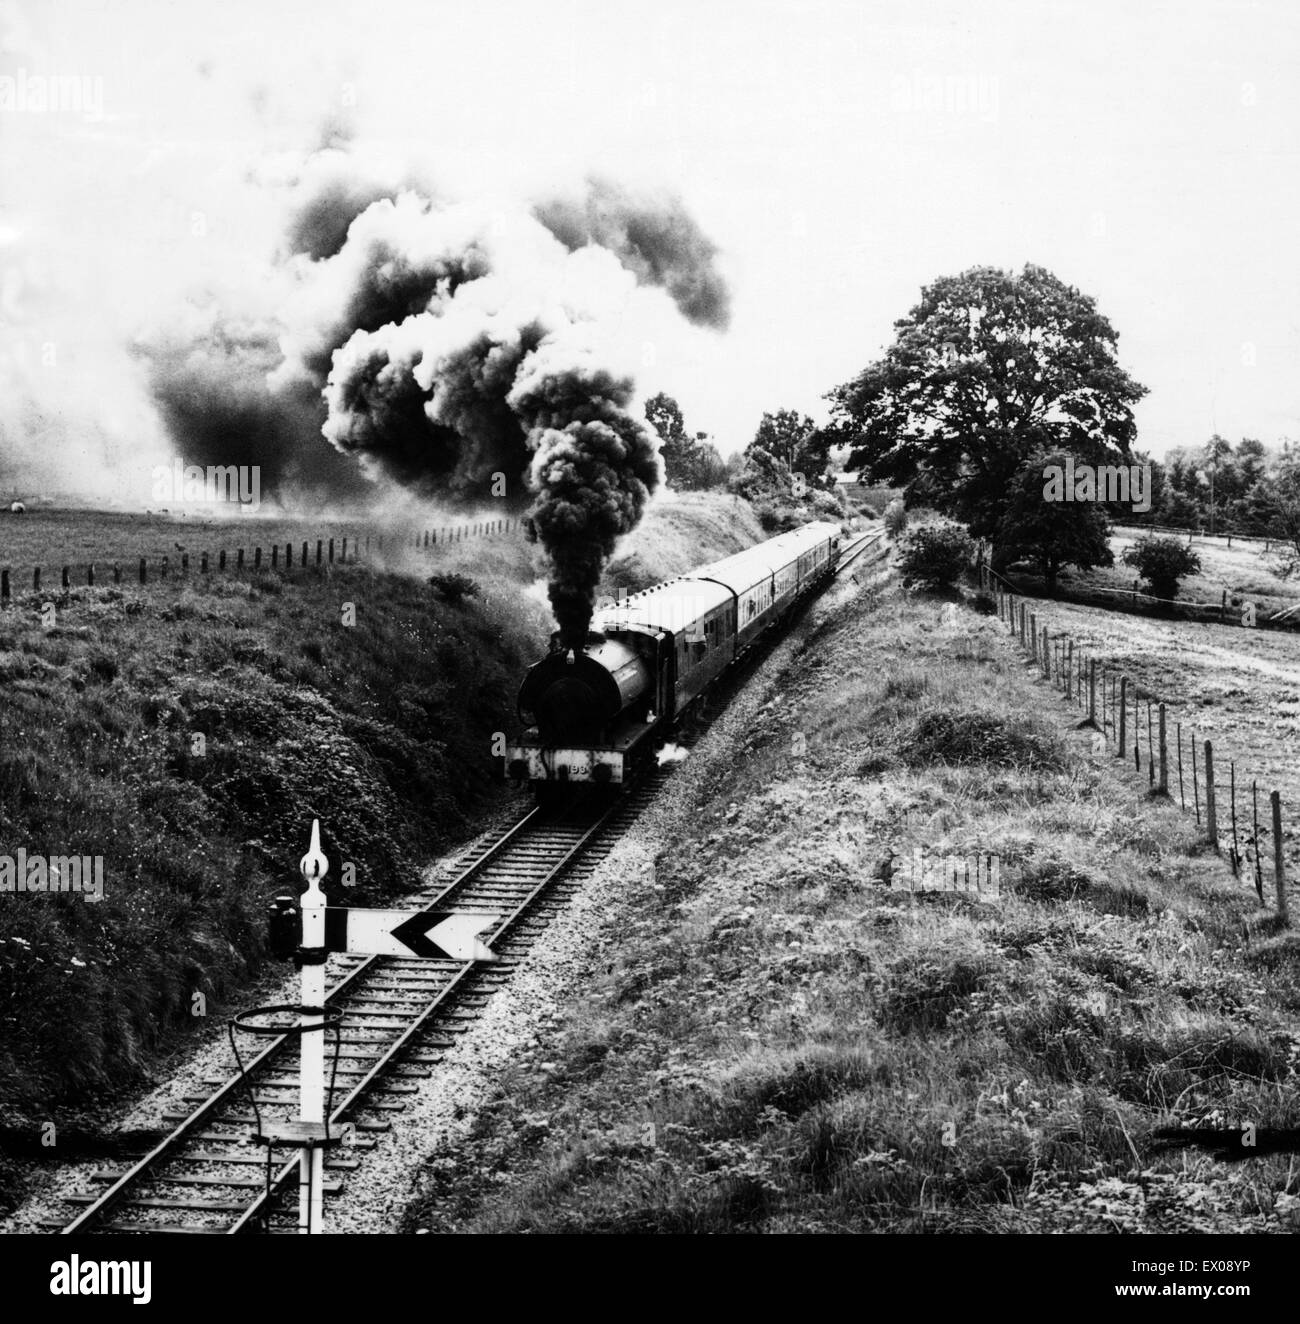 A steam train of the Severn Valley Railway rolls through the Shropshire countryside between Bridgnorth and Hampton Loade, Shropshire, England, 22nd August 1973. Severn Valley Railway Line. Stock Photo